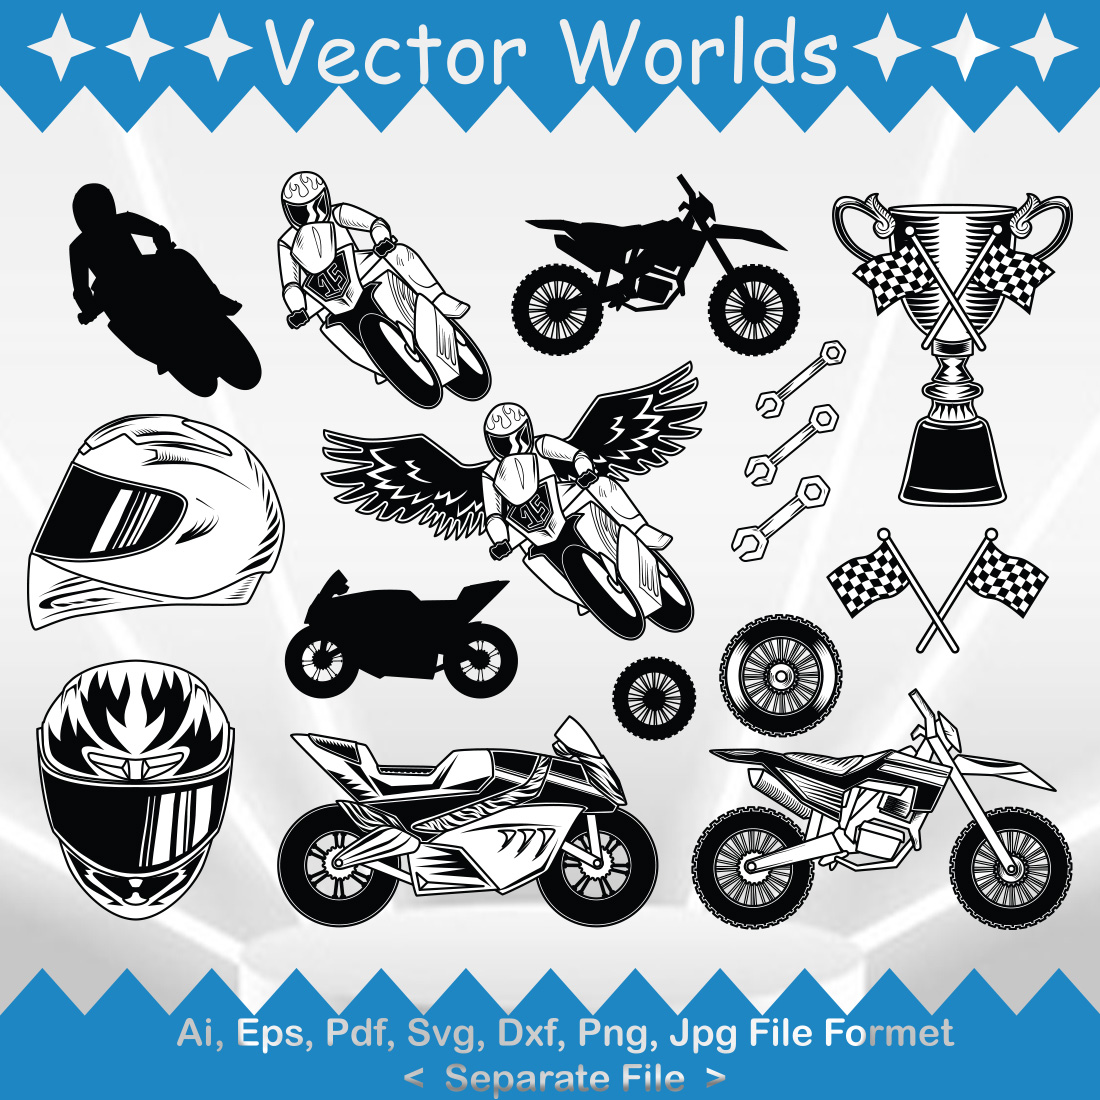 Motorcycle Element SVG Vector Design cover image.